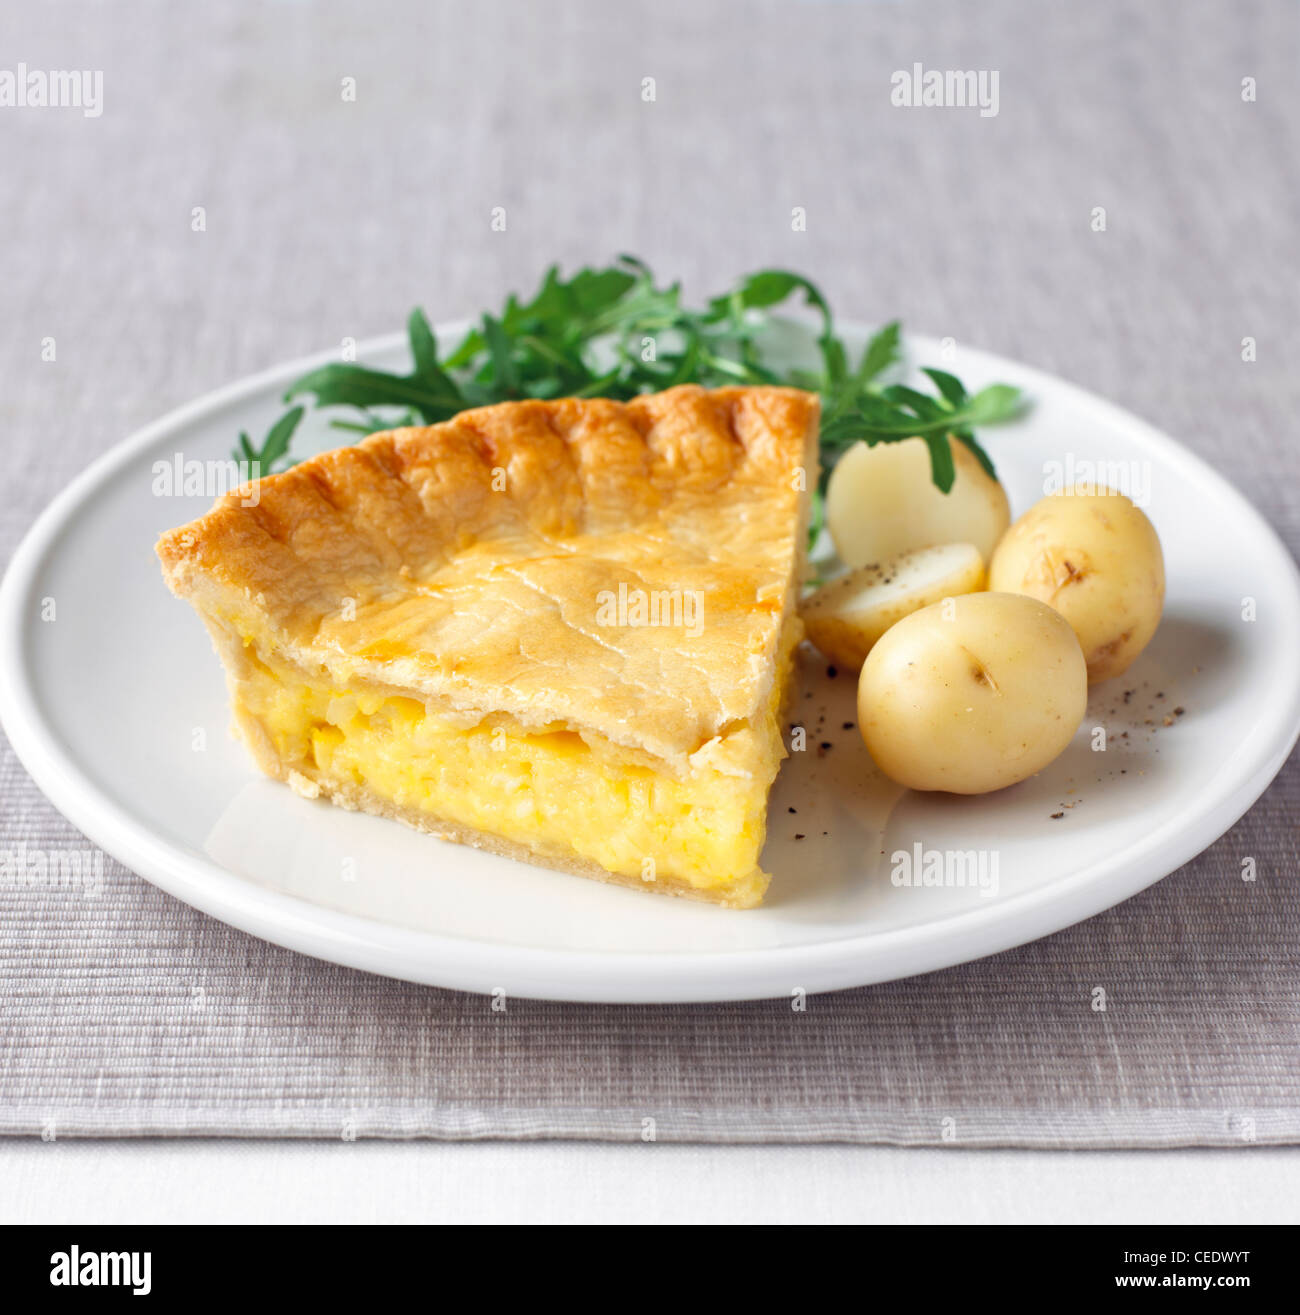 Cheese and onion pie with boiled potatoes Stock Photo